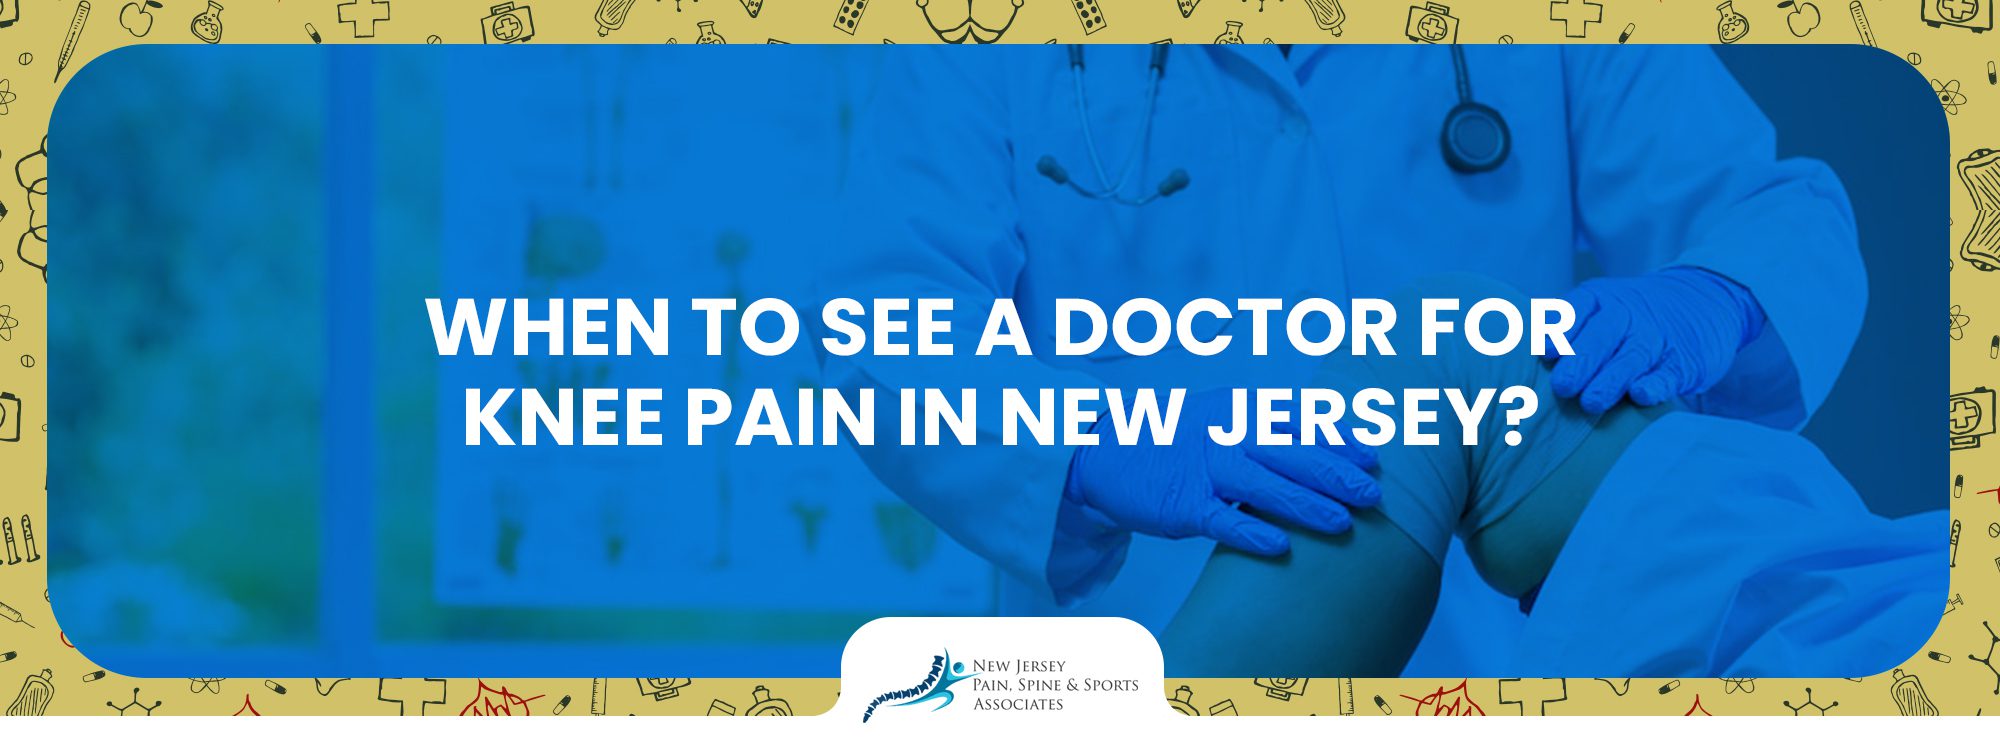 When To See A Doctor For Knee Pain In New Jersey 